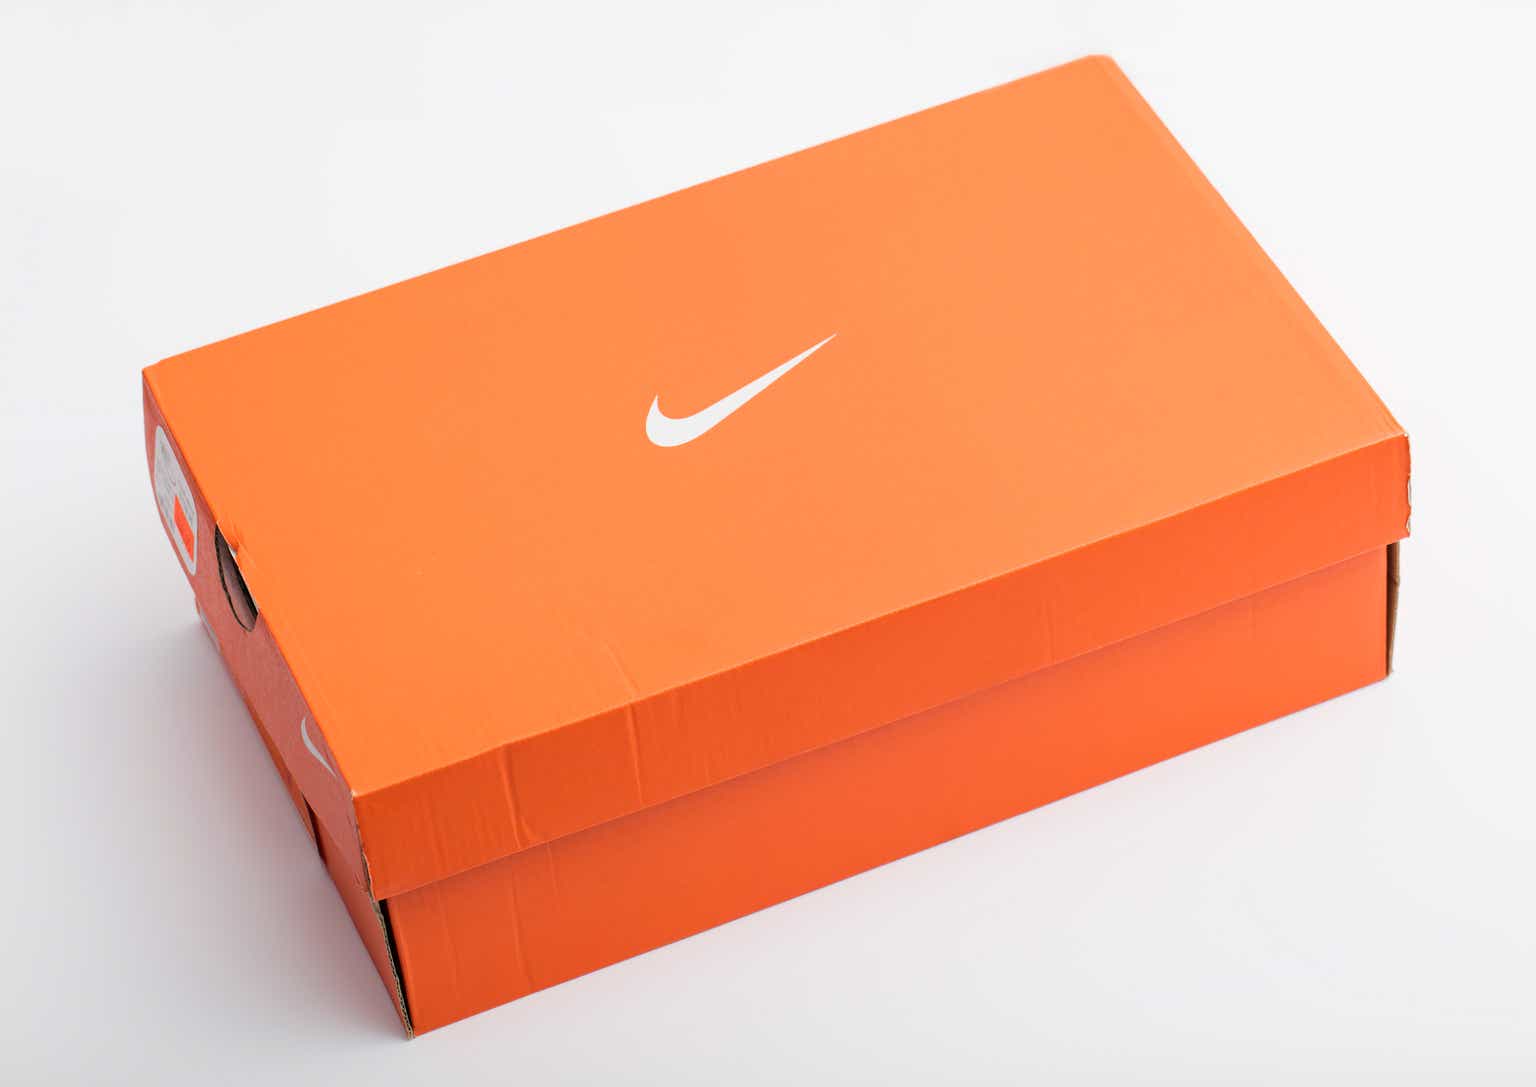 Nike: Resolving Inventory Issue Remains Painful (NYSE:NKE) | Seeking Alpha